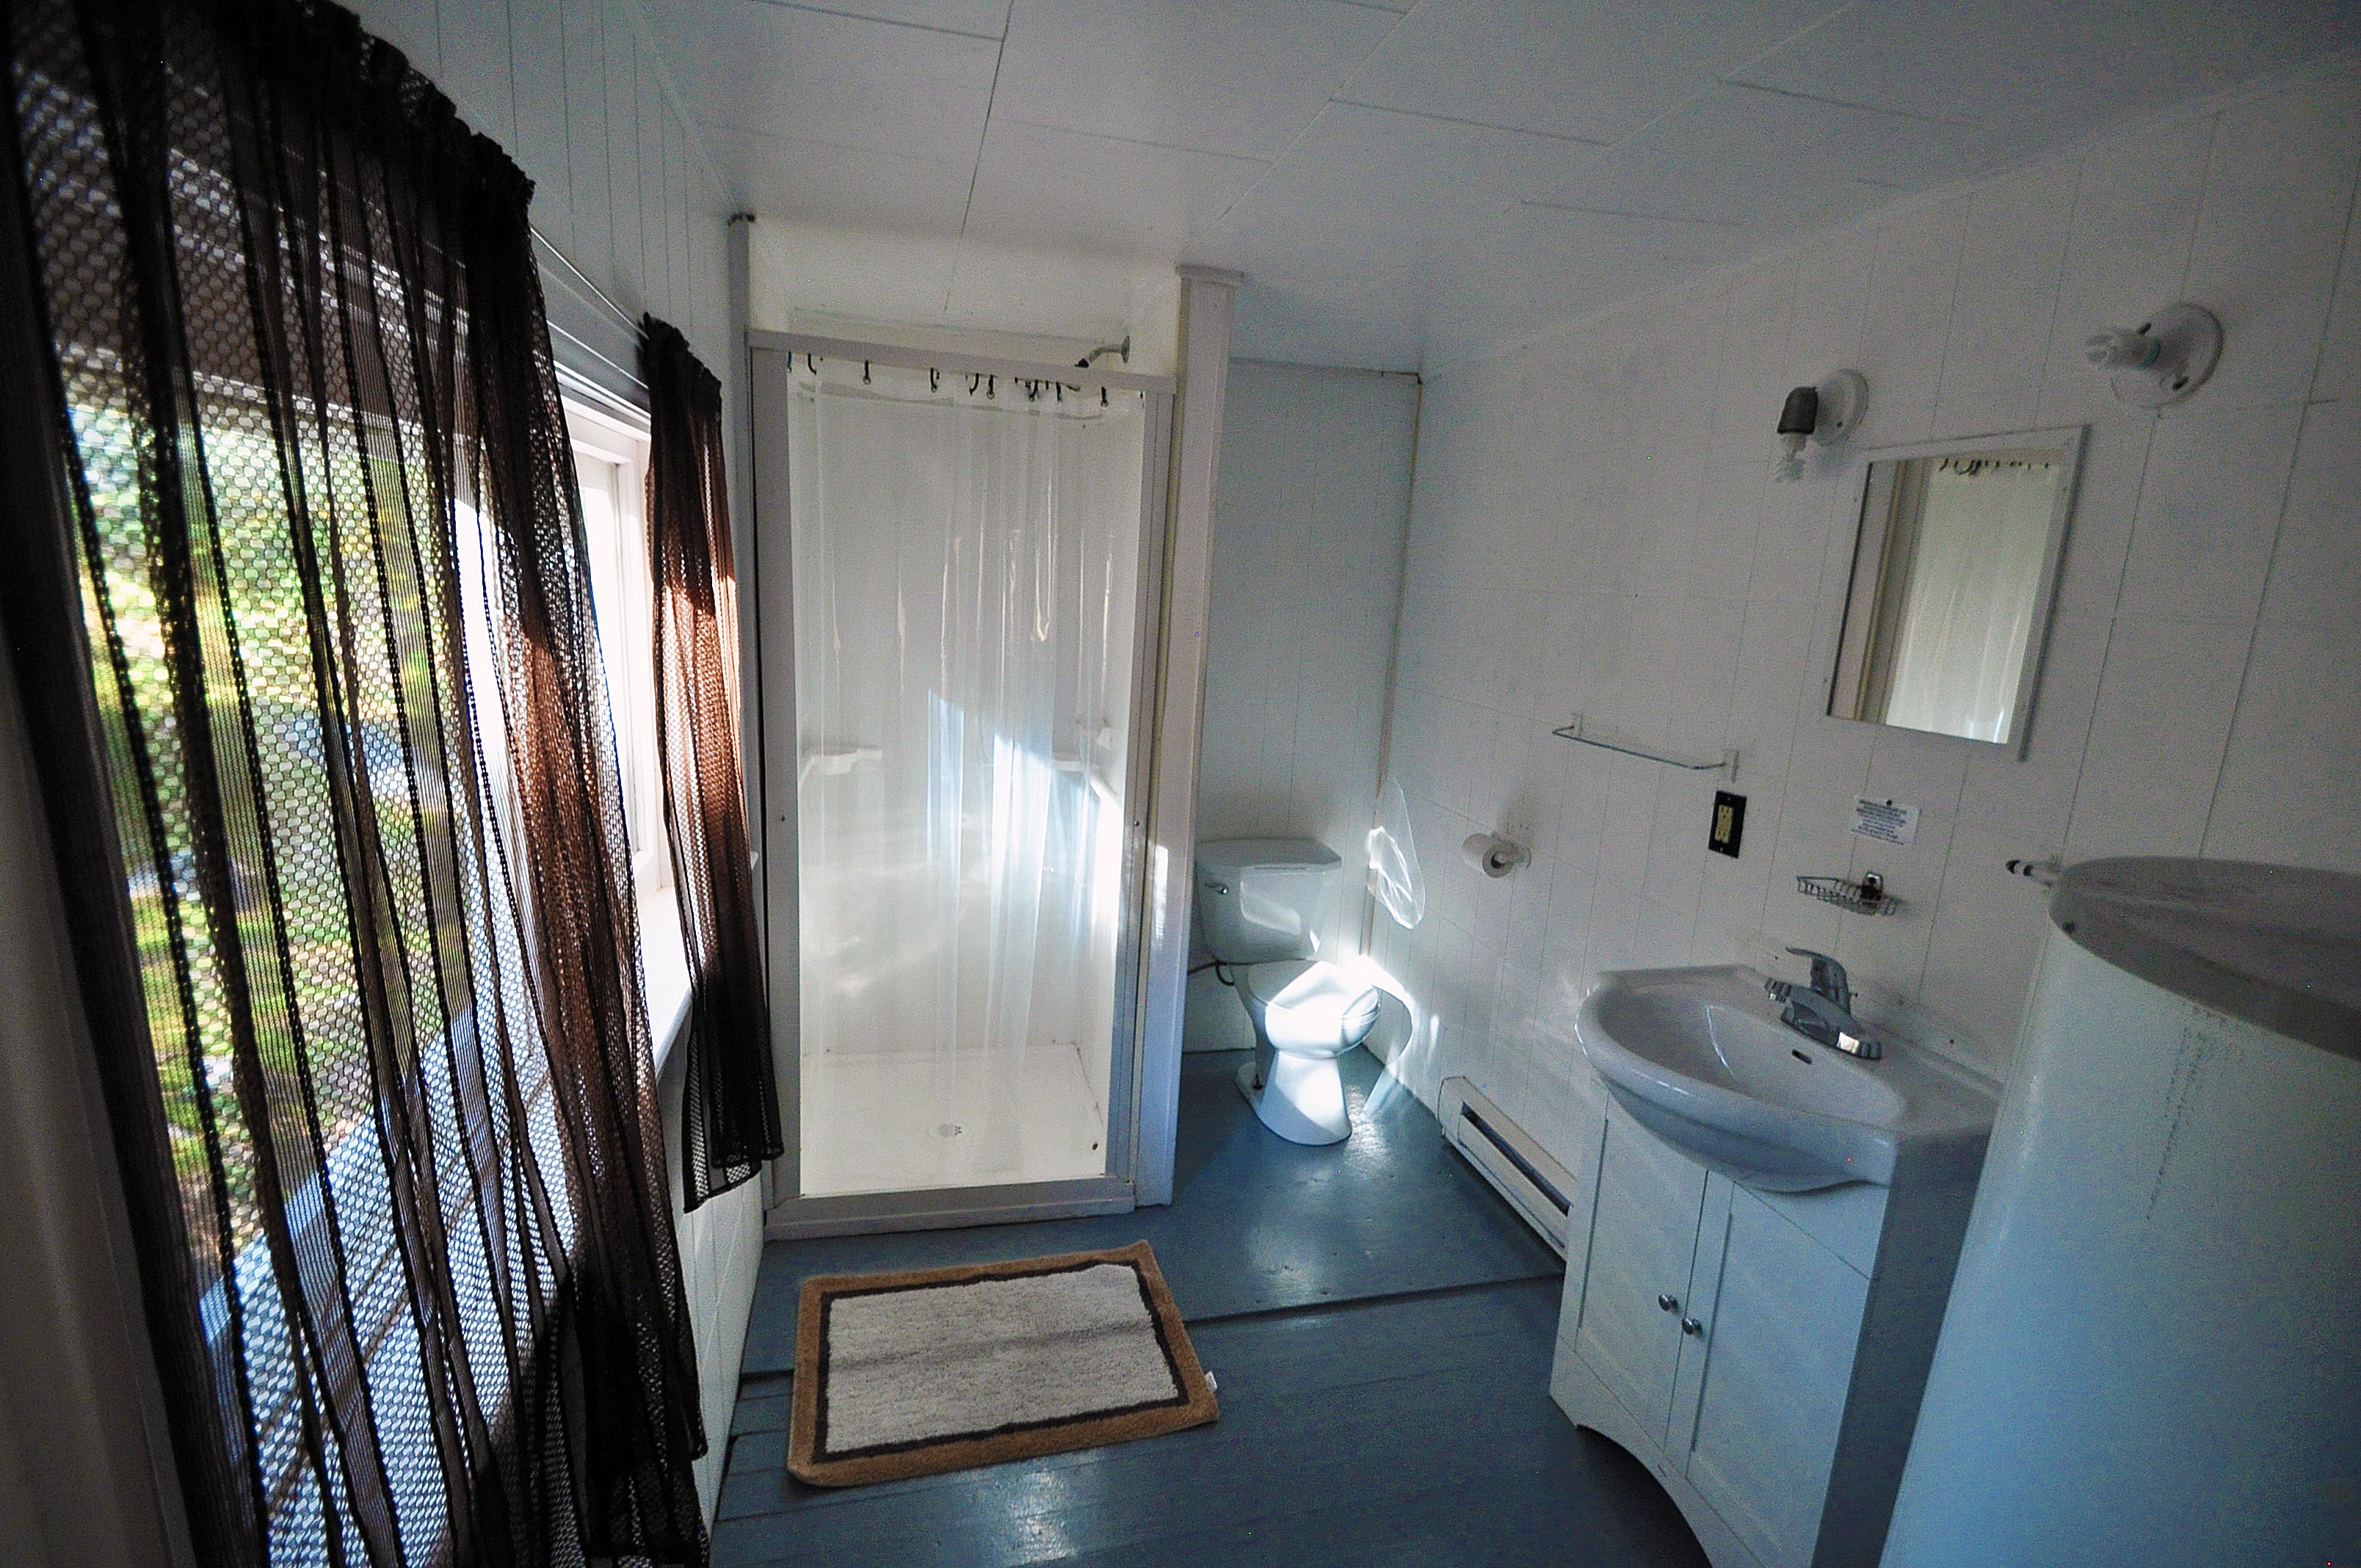 Cabin 15 - bathroom with shower.